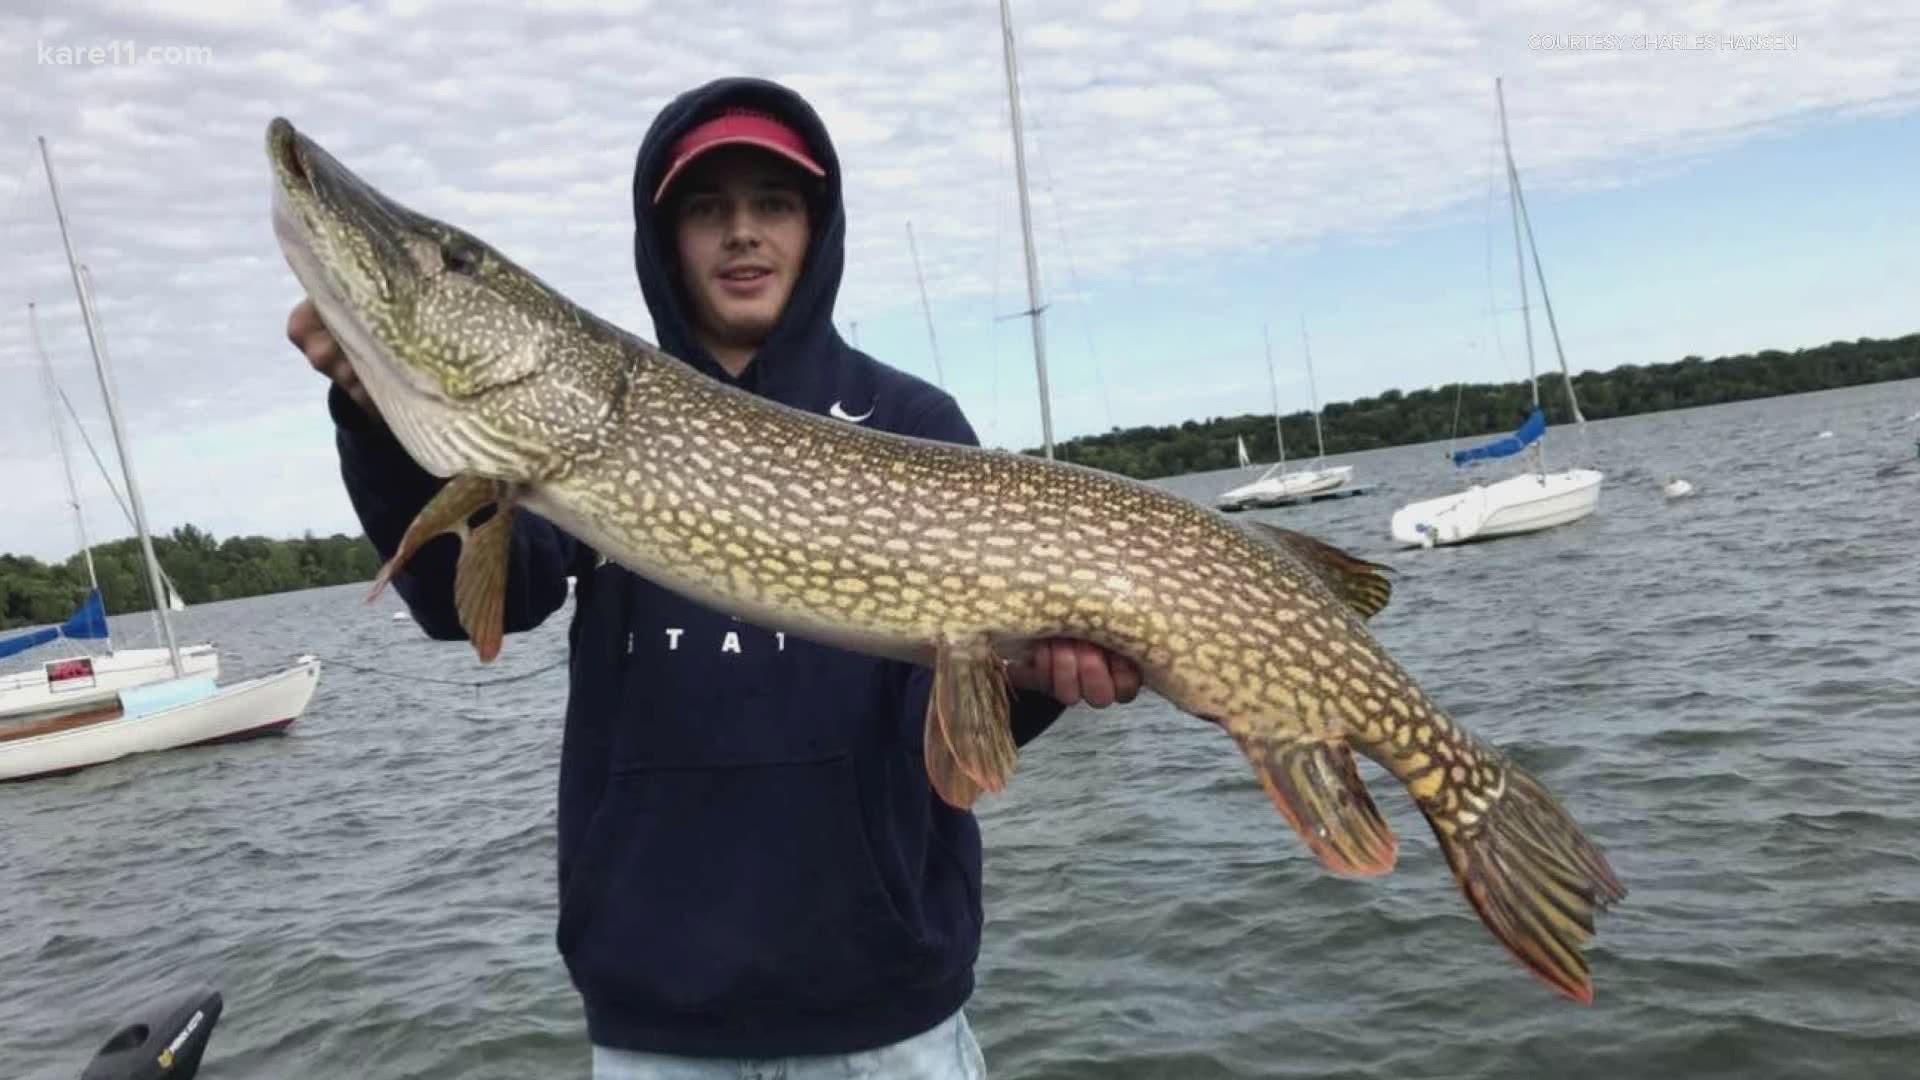 Dedicated angler Charles Hansen and a buddy were on Lake Harriet Tuesday when Charles tied into a northern pike that was one for the ages.